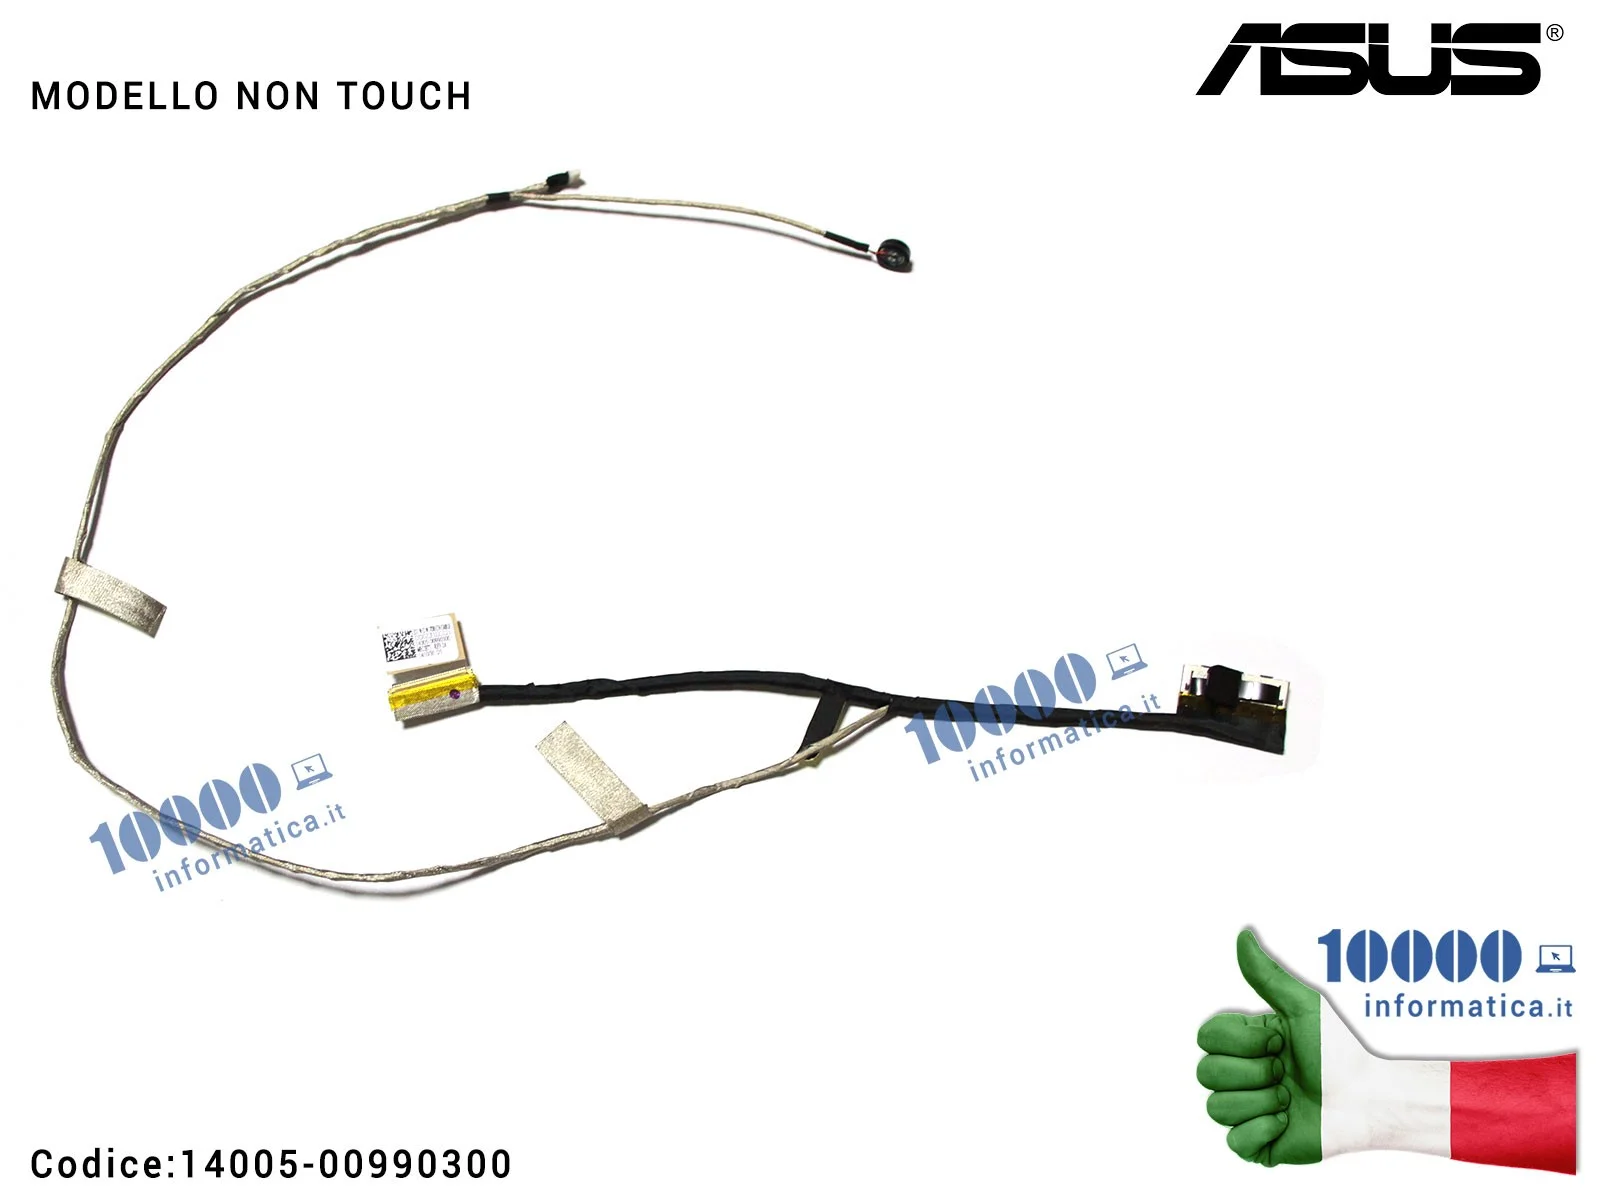 14005-00990300 Cavo Flat LCD ASUS VivoBook S451 S451L S451LA S451LB S451LN [NO TOUCH] 14005-00990300